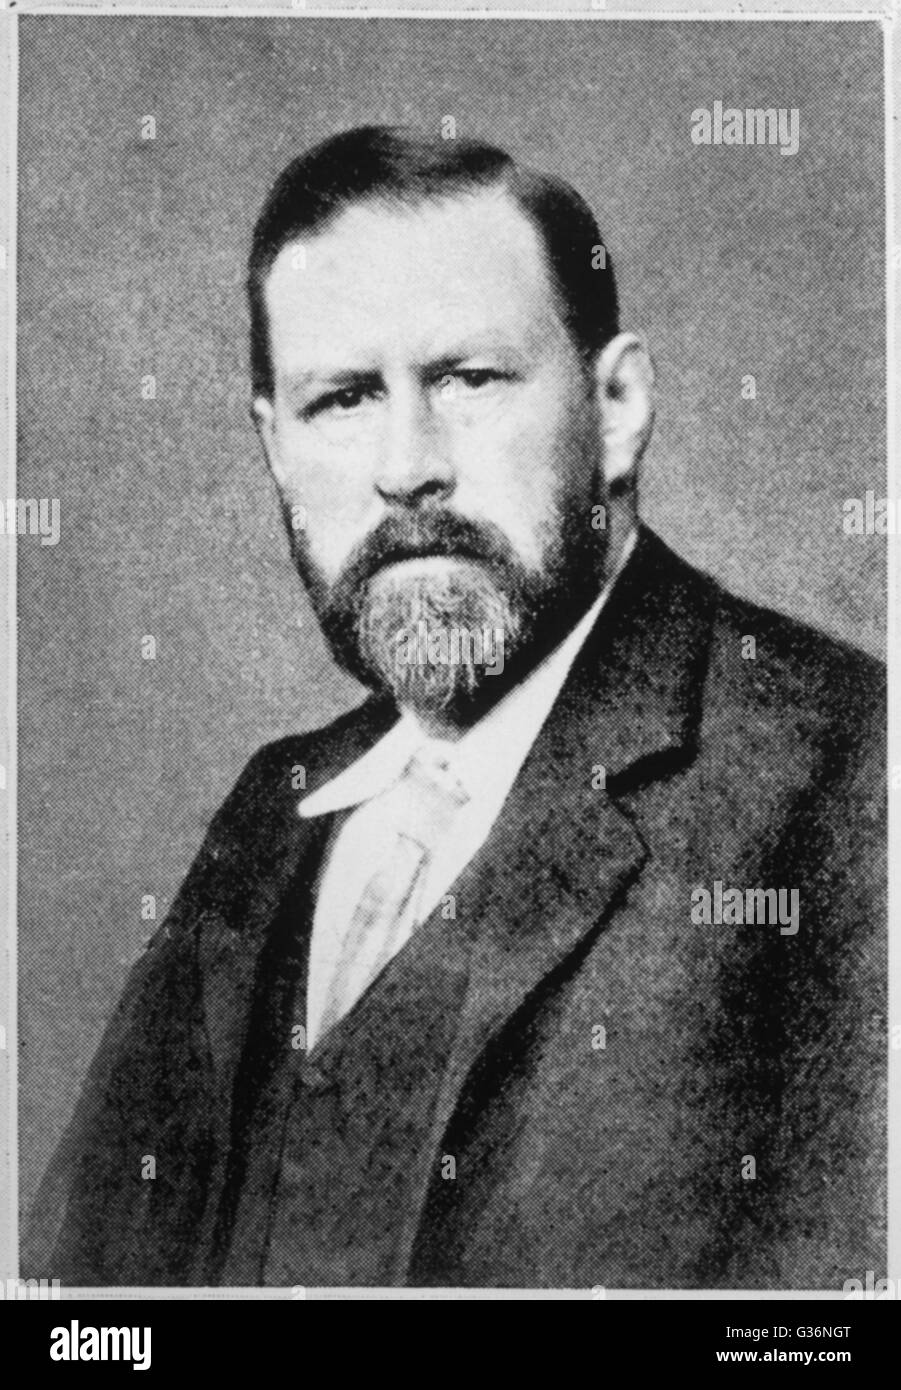 Bram Stoker, novelist and short story writer, best known for the gothic novel Dracula (1897).  He was also theatre manager for Henry Irving at the Lyceum Theatre, London.        Date: 1847 - 1912 Stock Photo